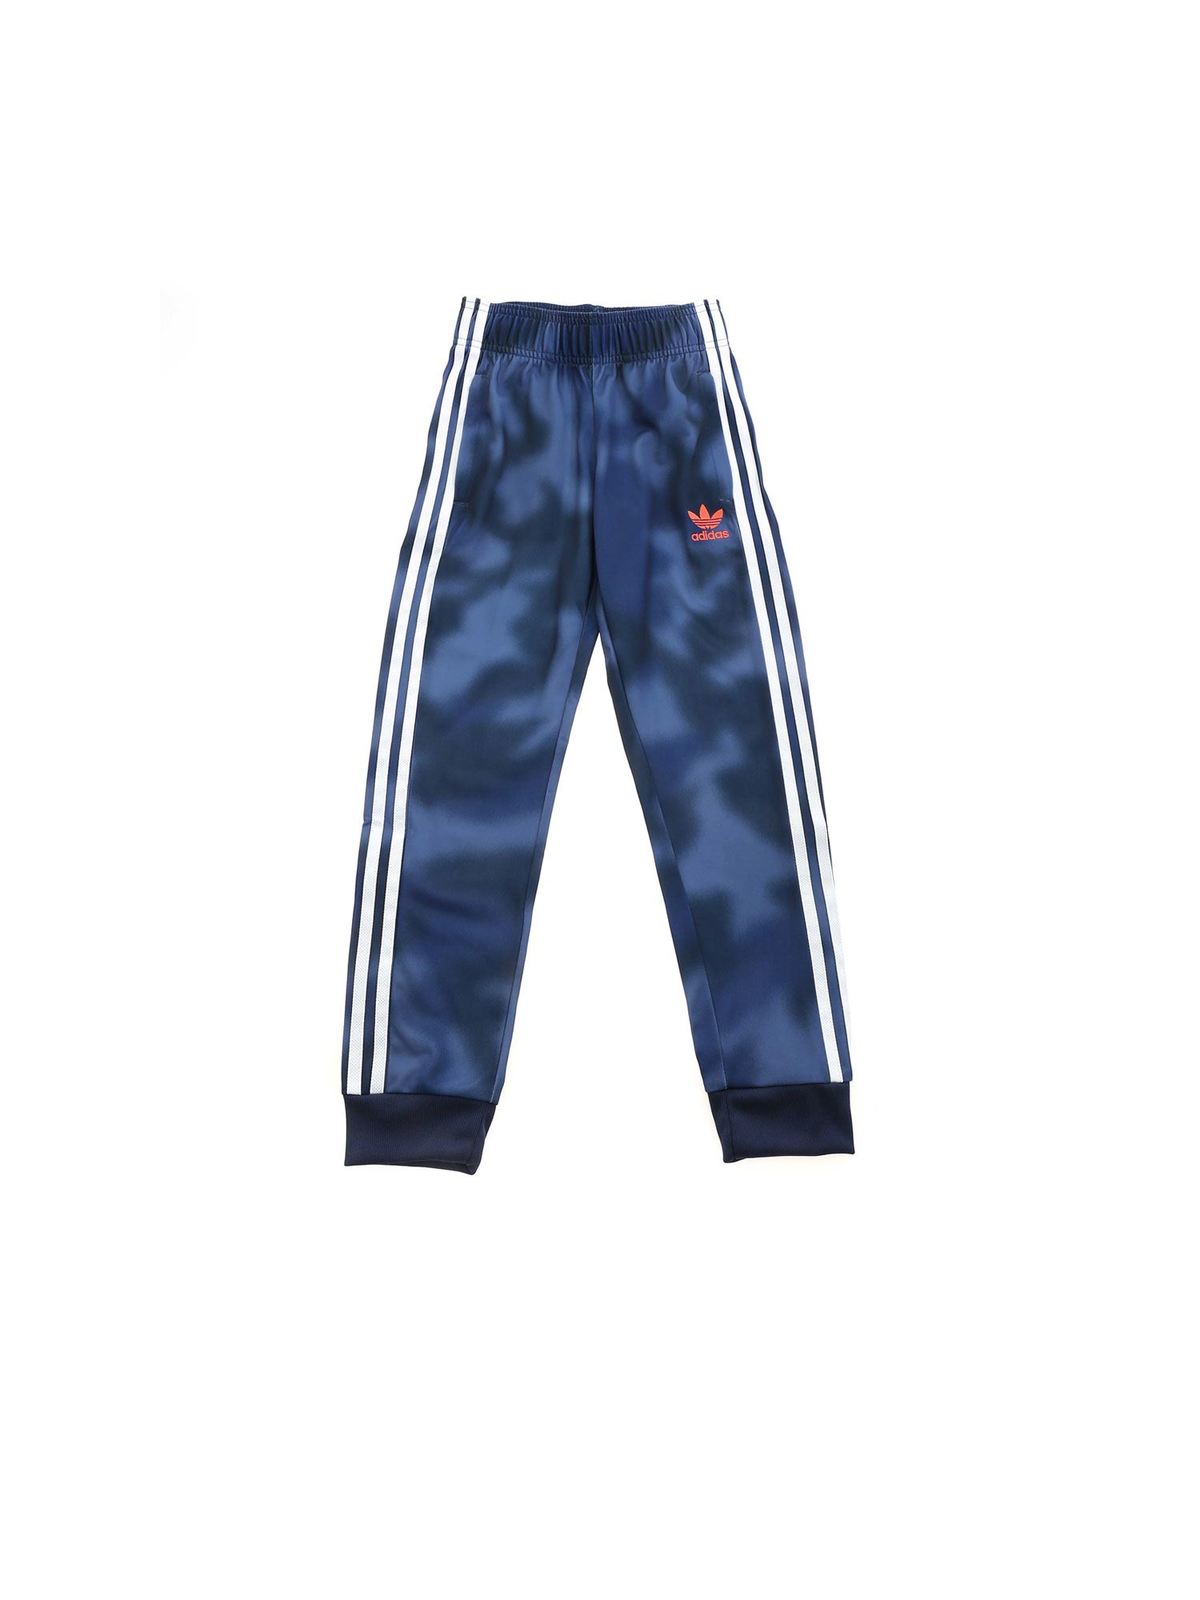 ADIDAS ORIGINALS LOGO BANDS trousers IN LIGHT BLUE